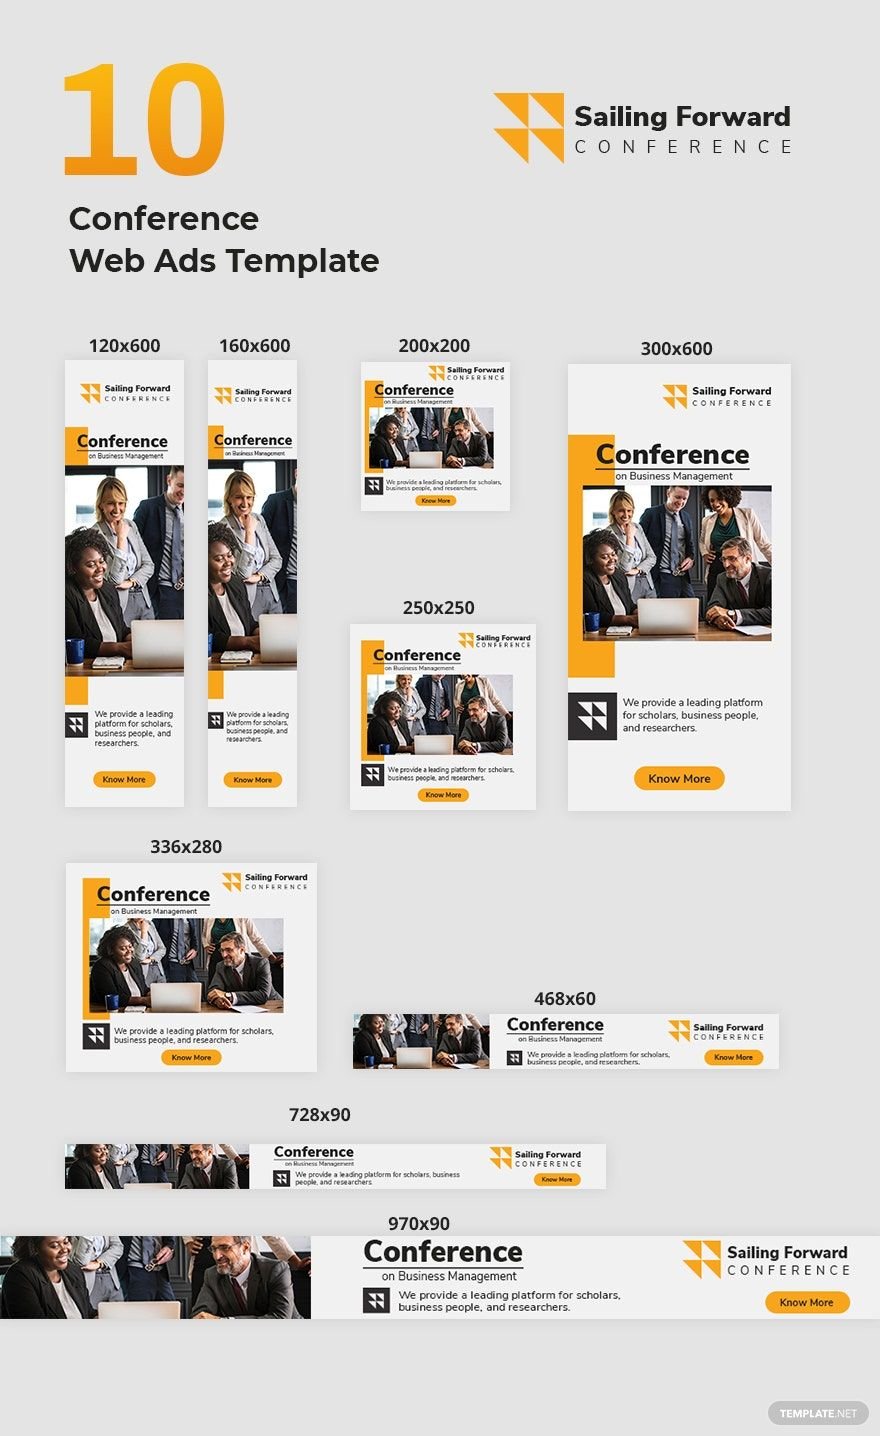 Conference Web Ads Template